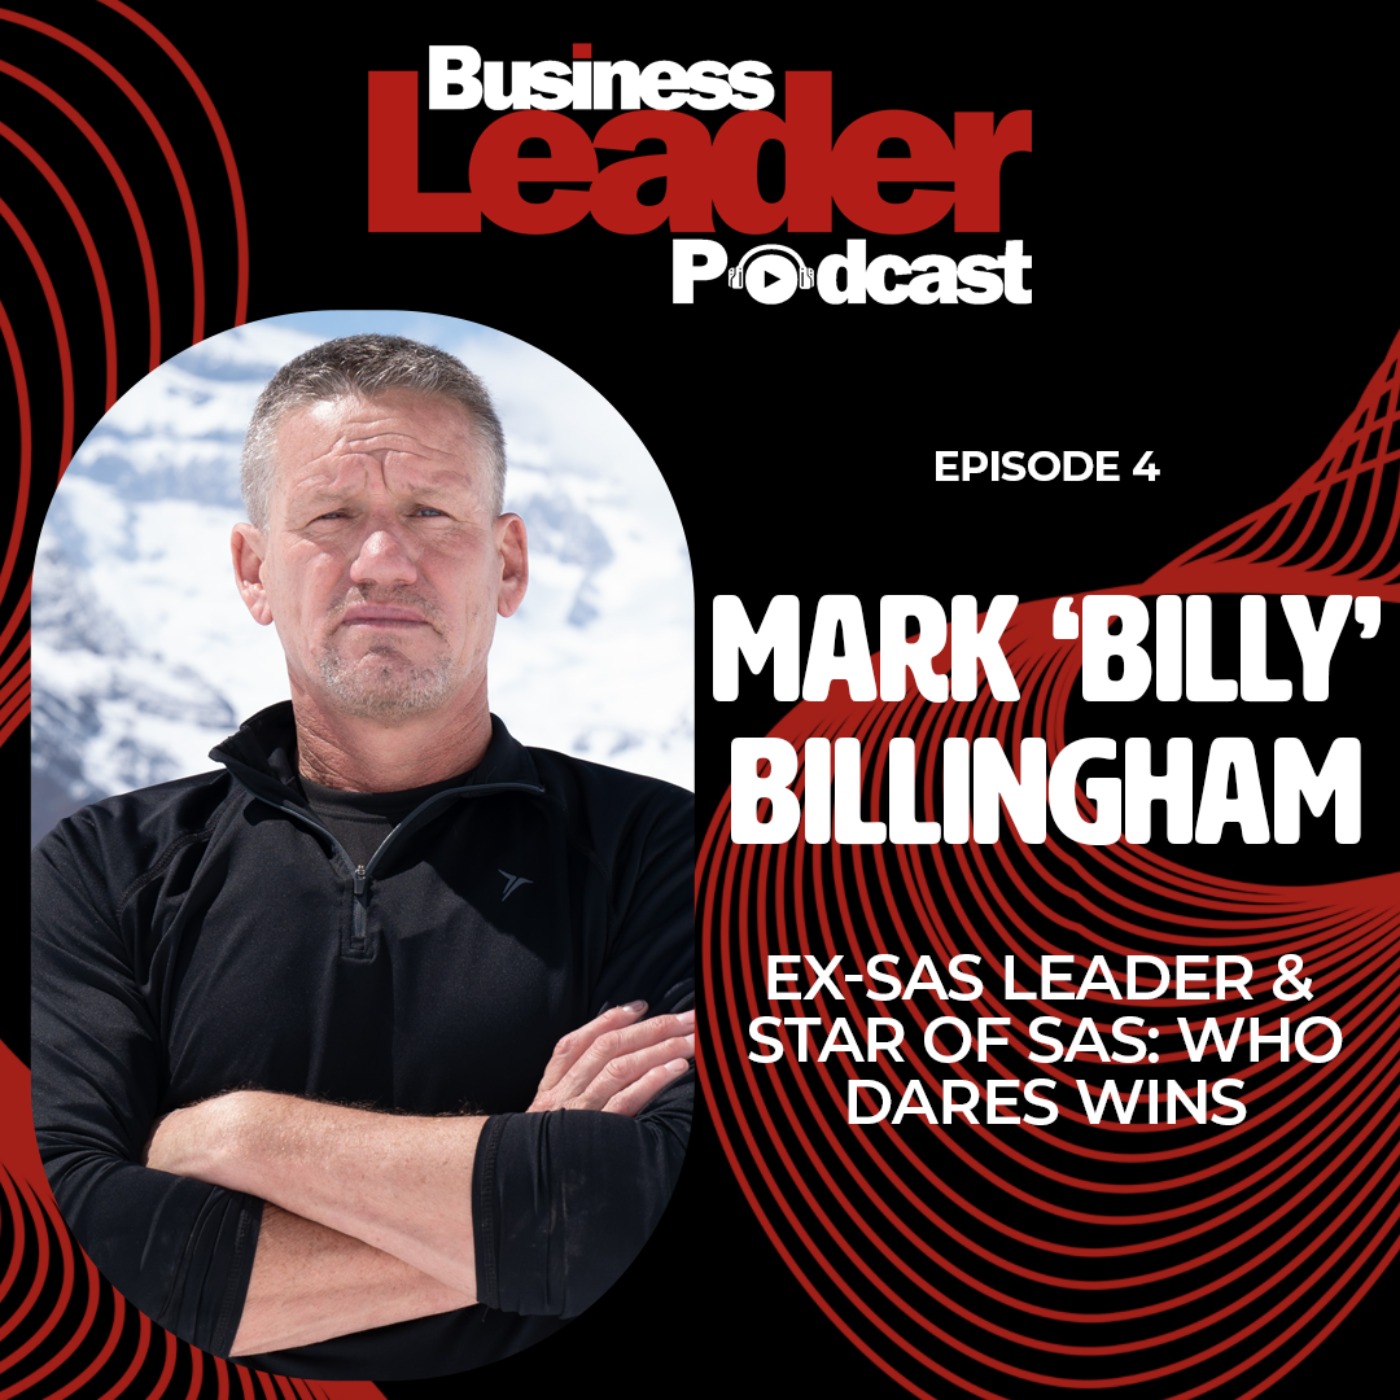 Mark 'Billy' Billingham: ex-SAS leader and star of Channel 4’s SAS: Who Dares Wins